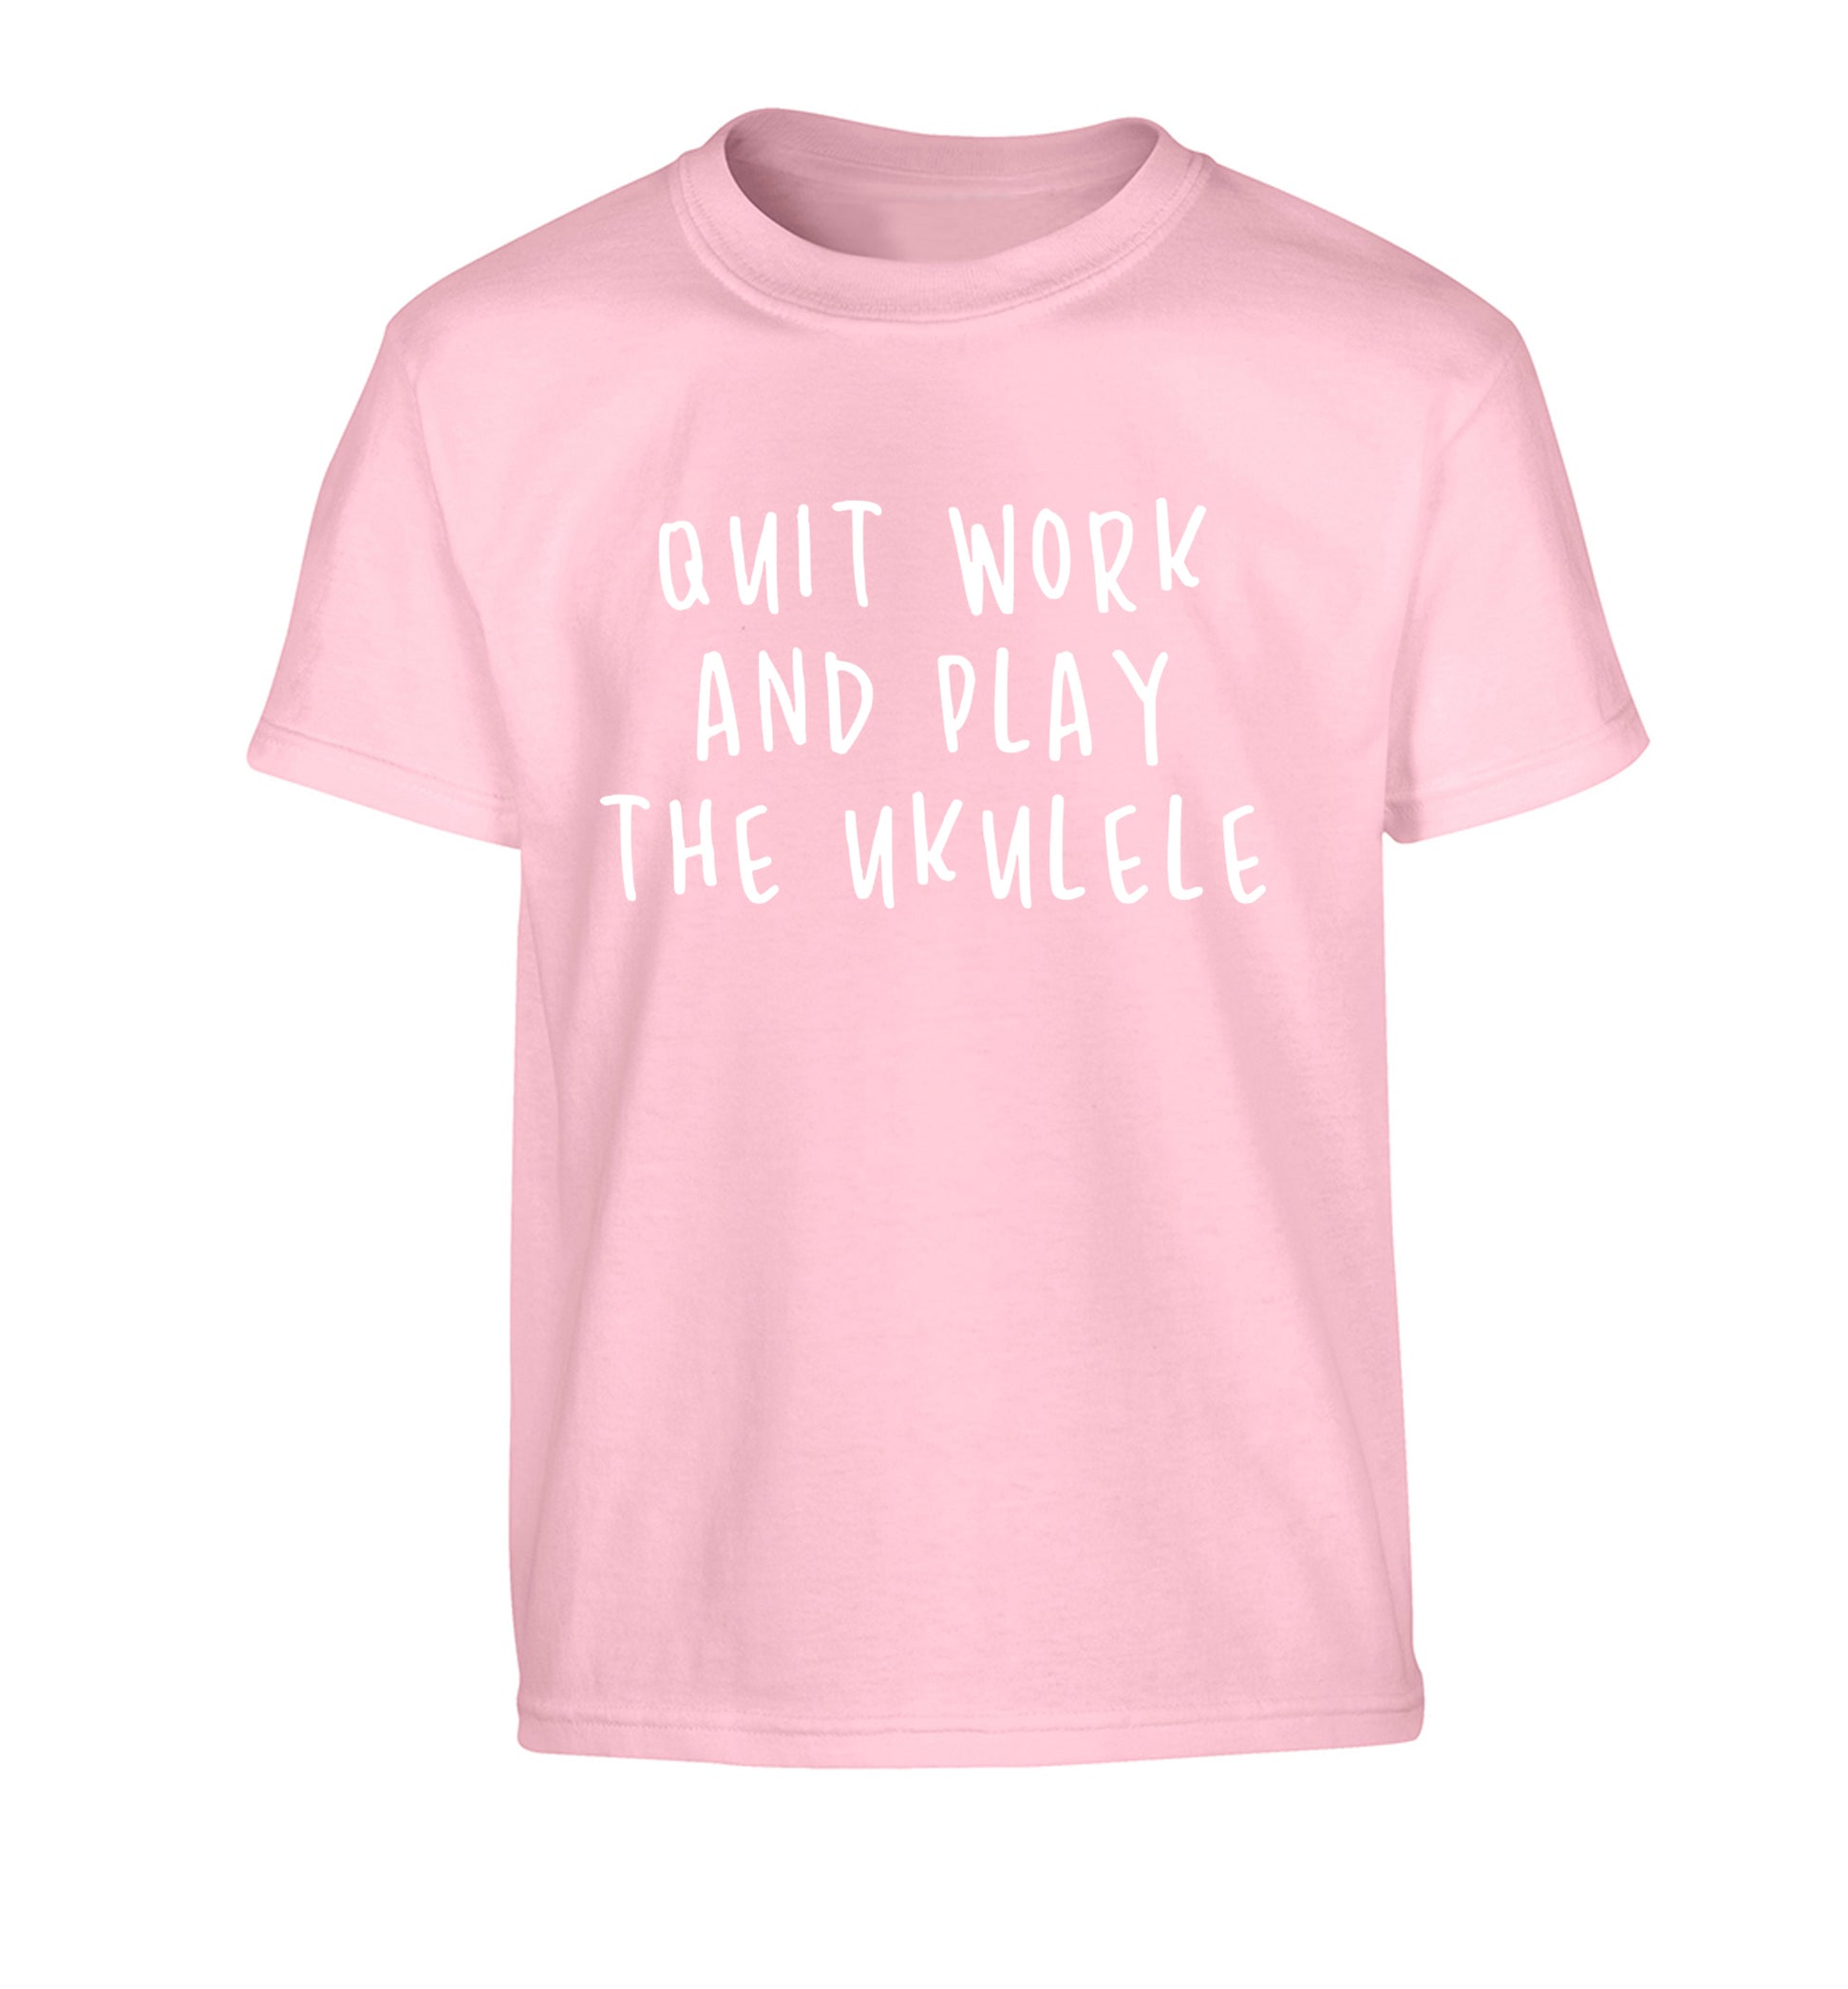 Quit work and play the ukulele Children's light pink Tshirt 12-14 Years